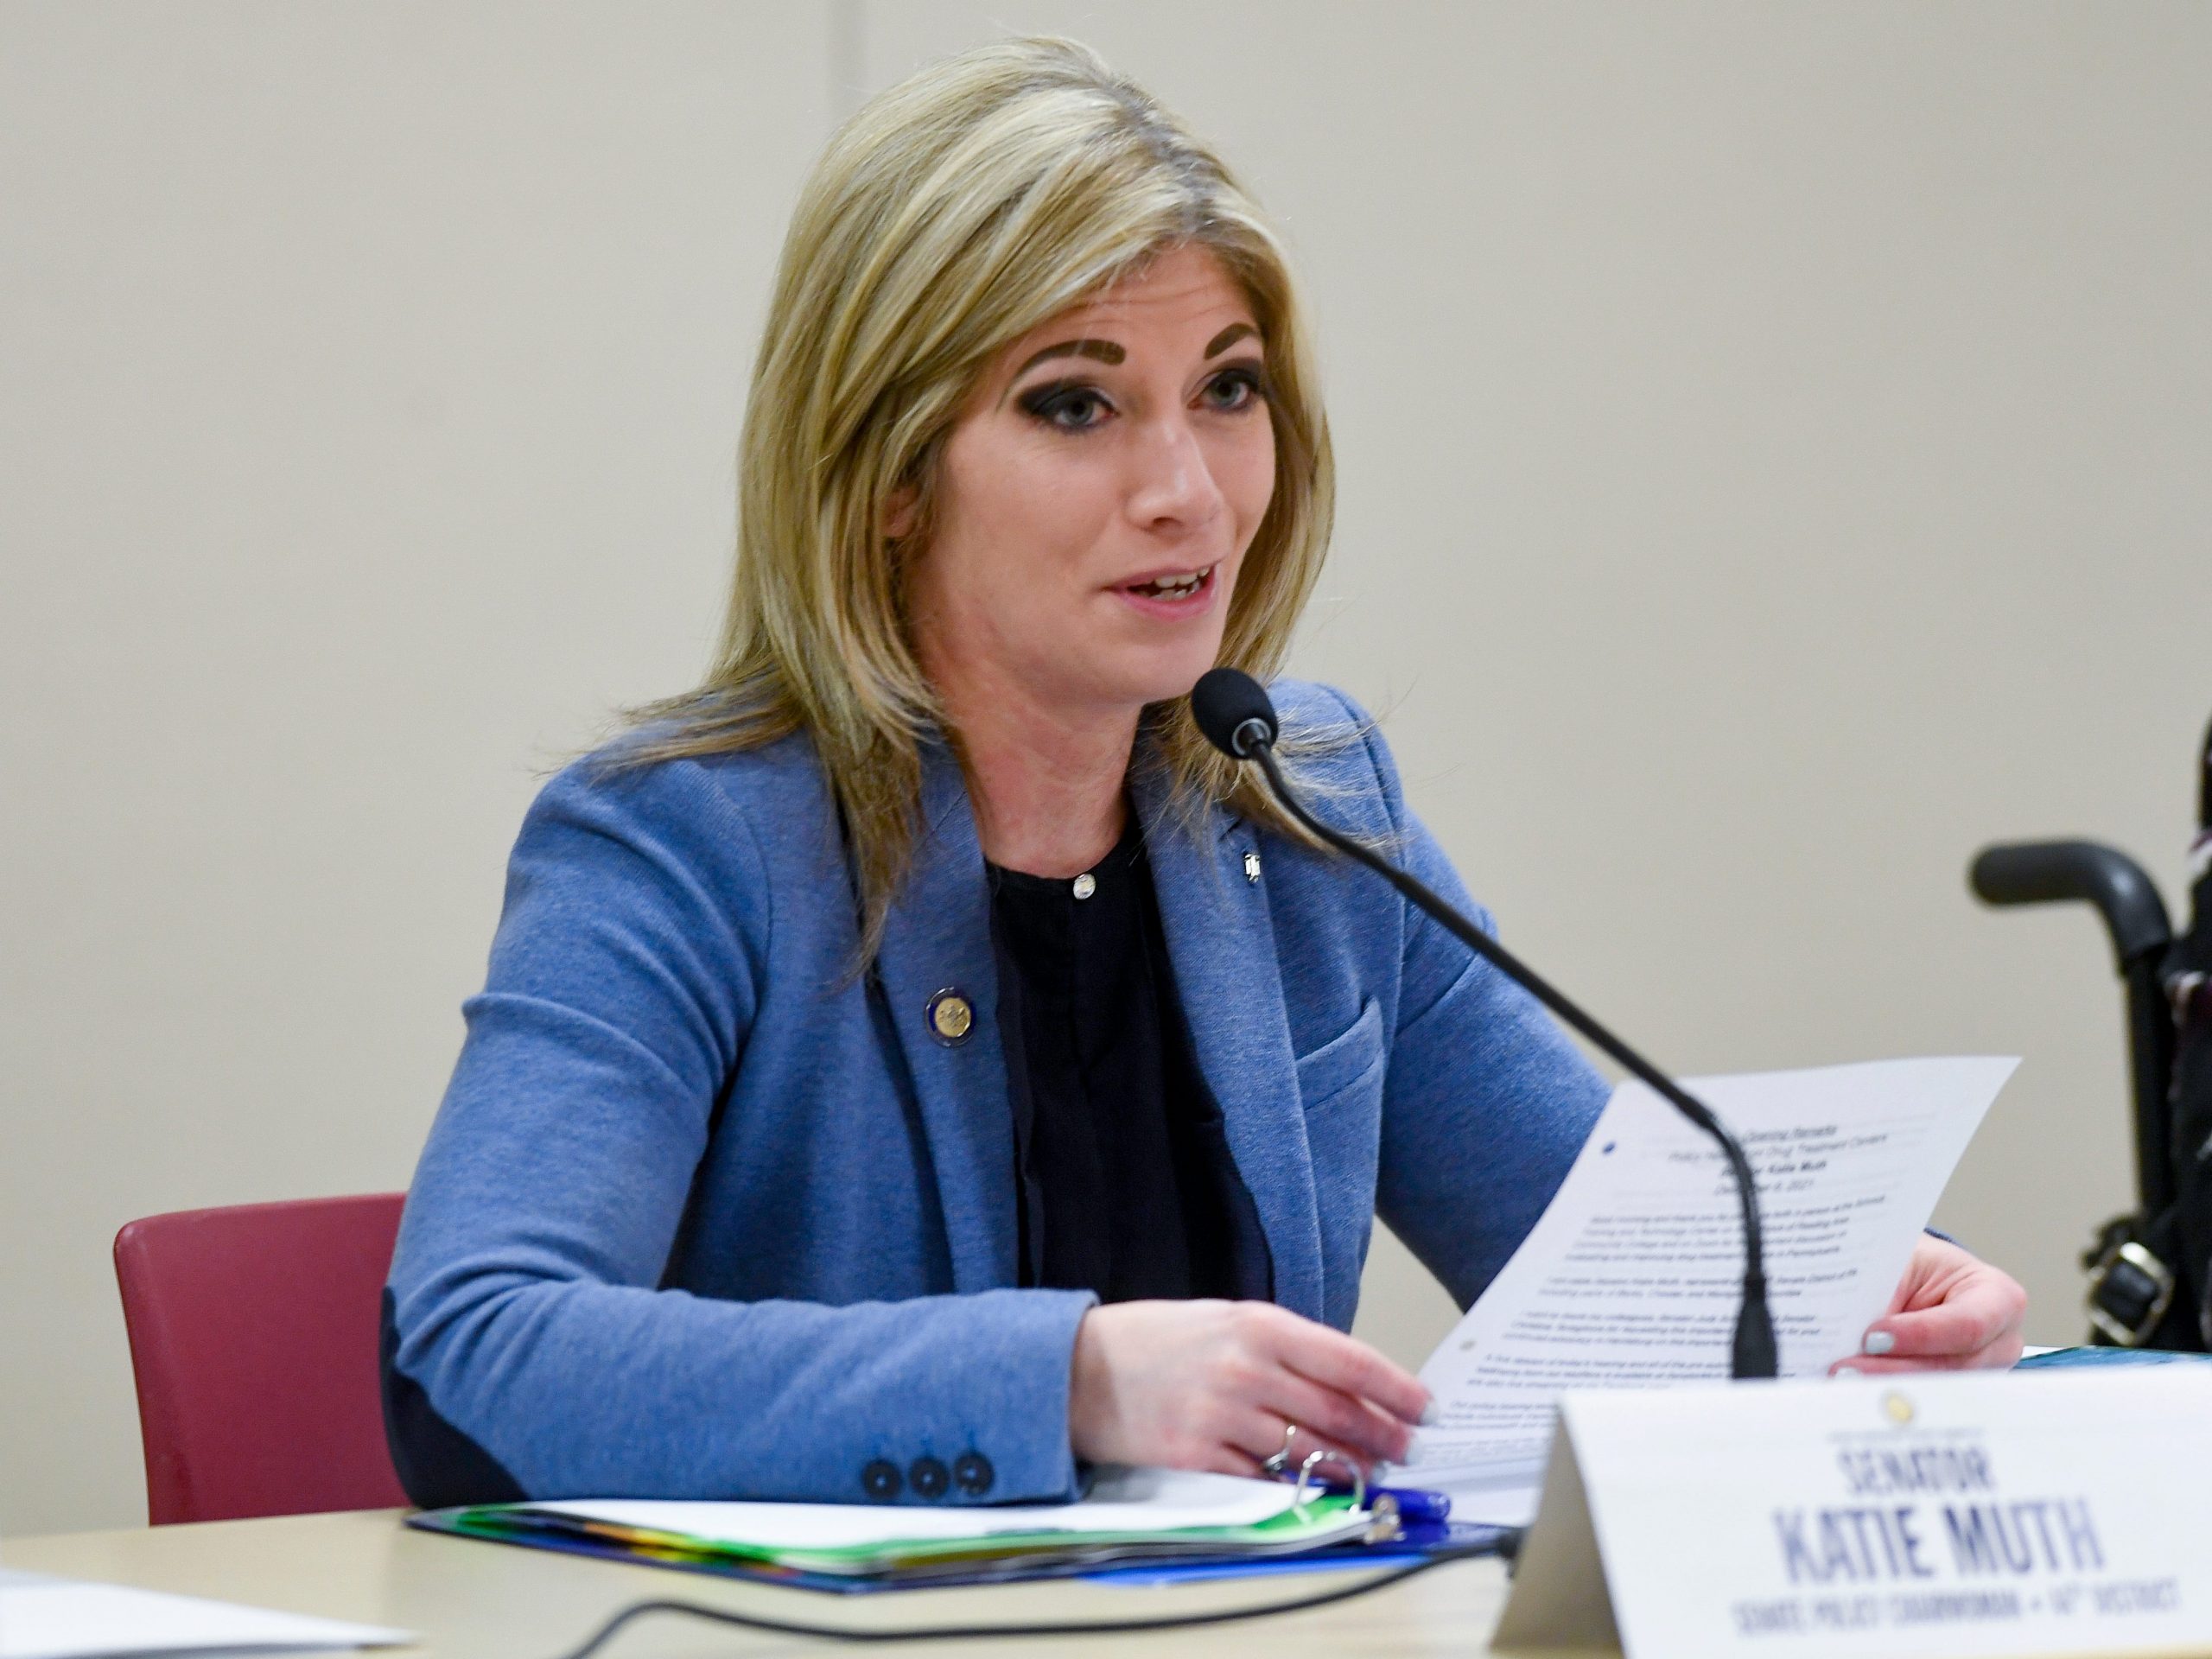 Katie Muth speaks at a hearing